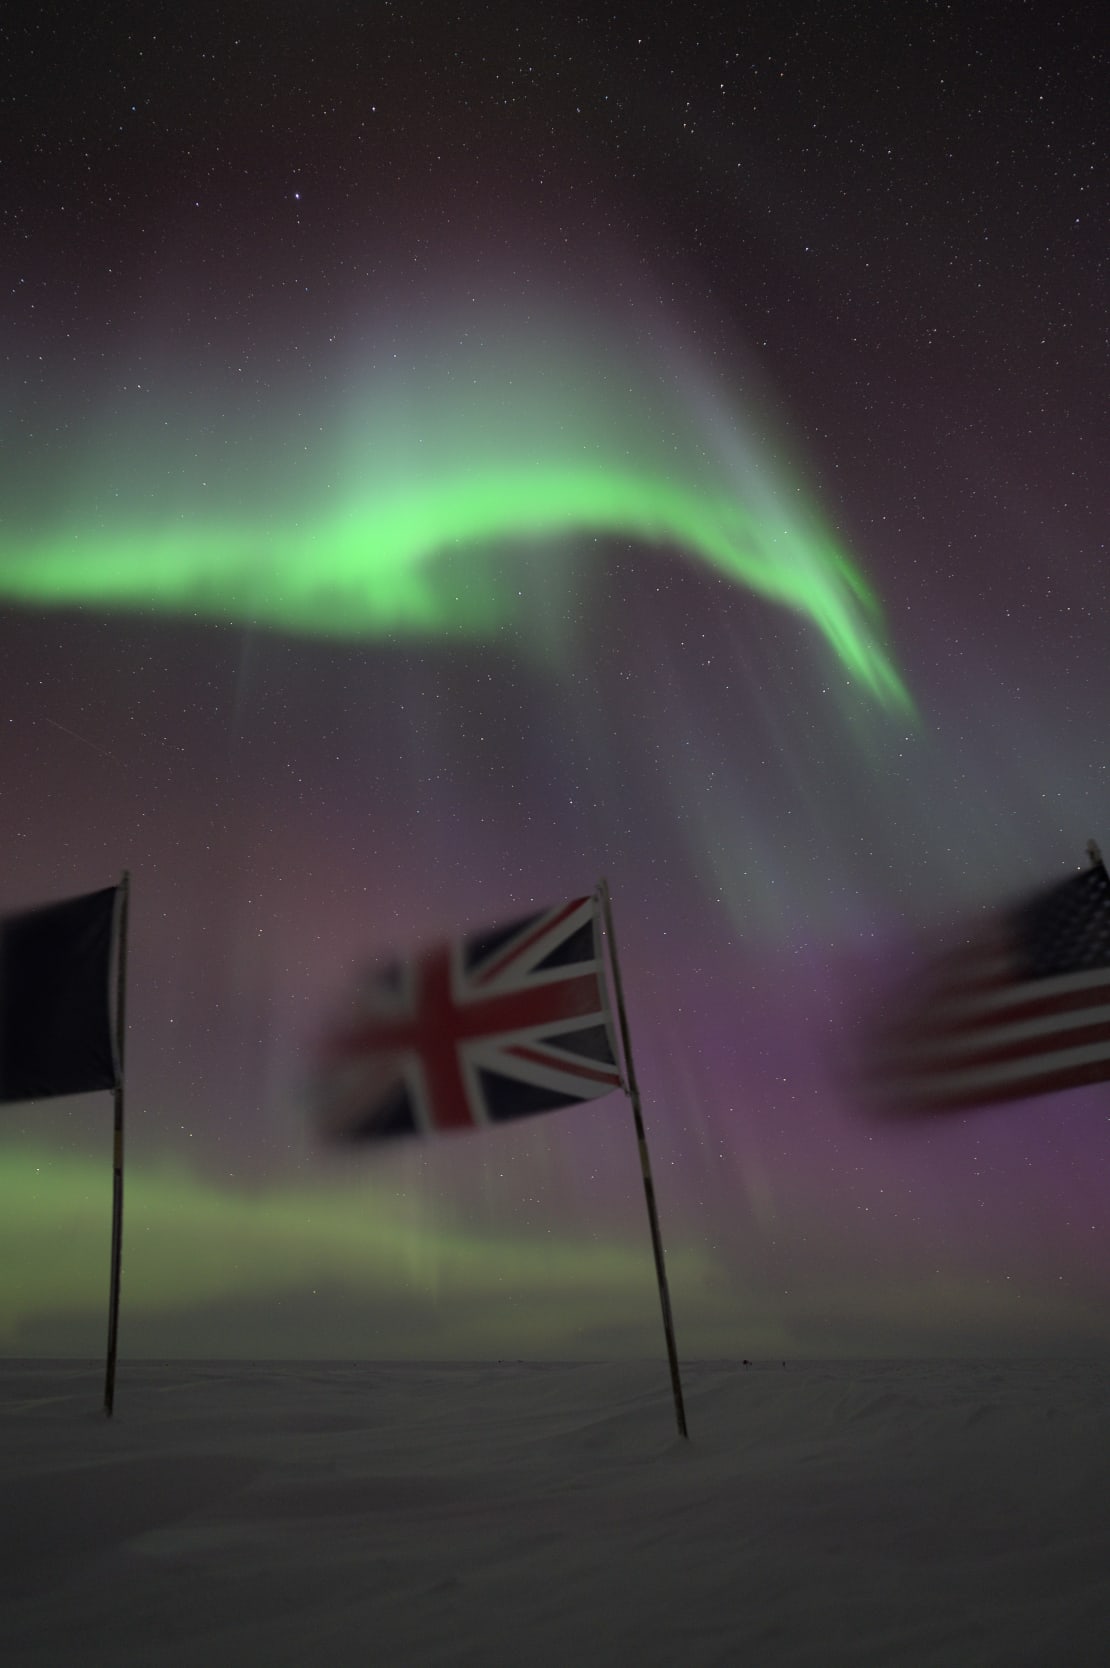 Bright green auroras swirling above some of the flags at the ceremonial Pole, flapping in the wind.